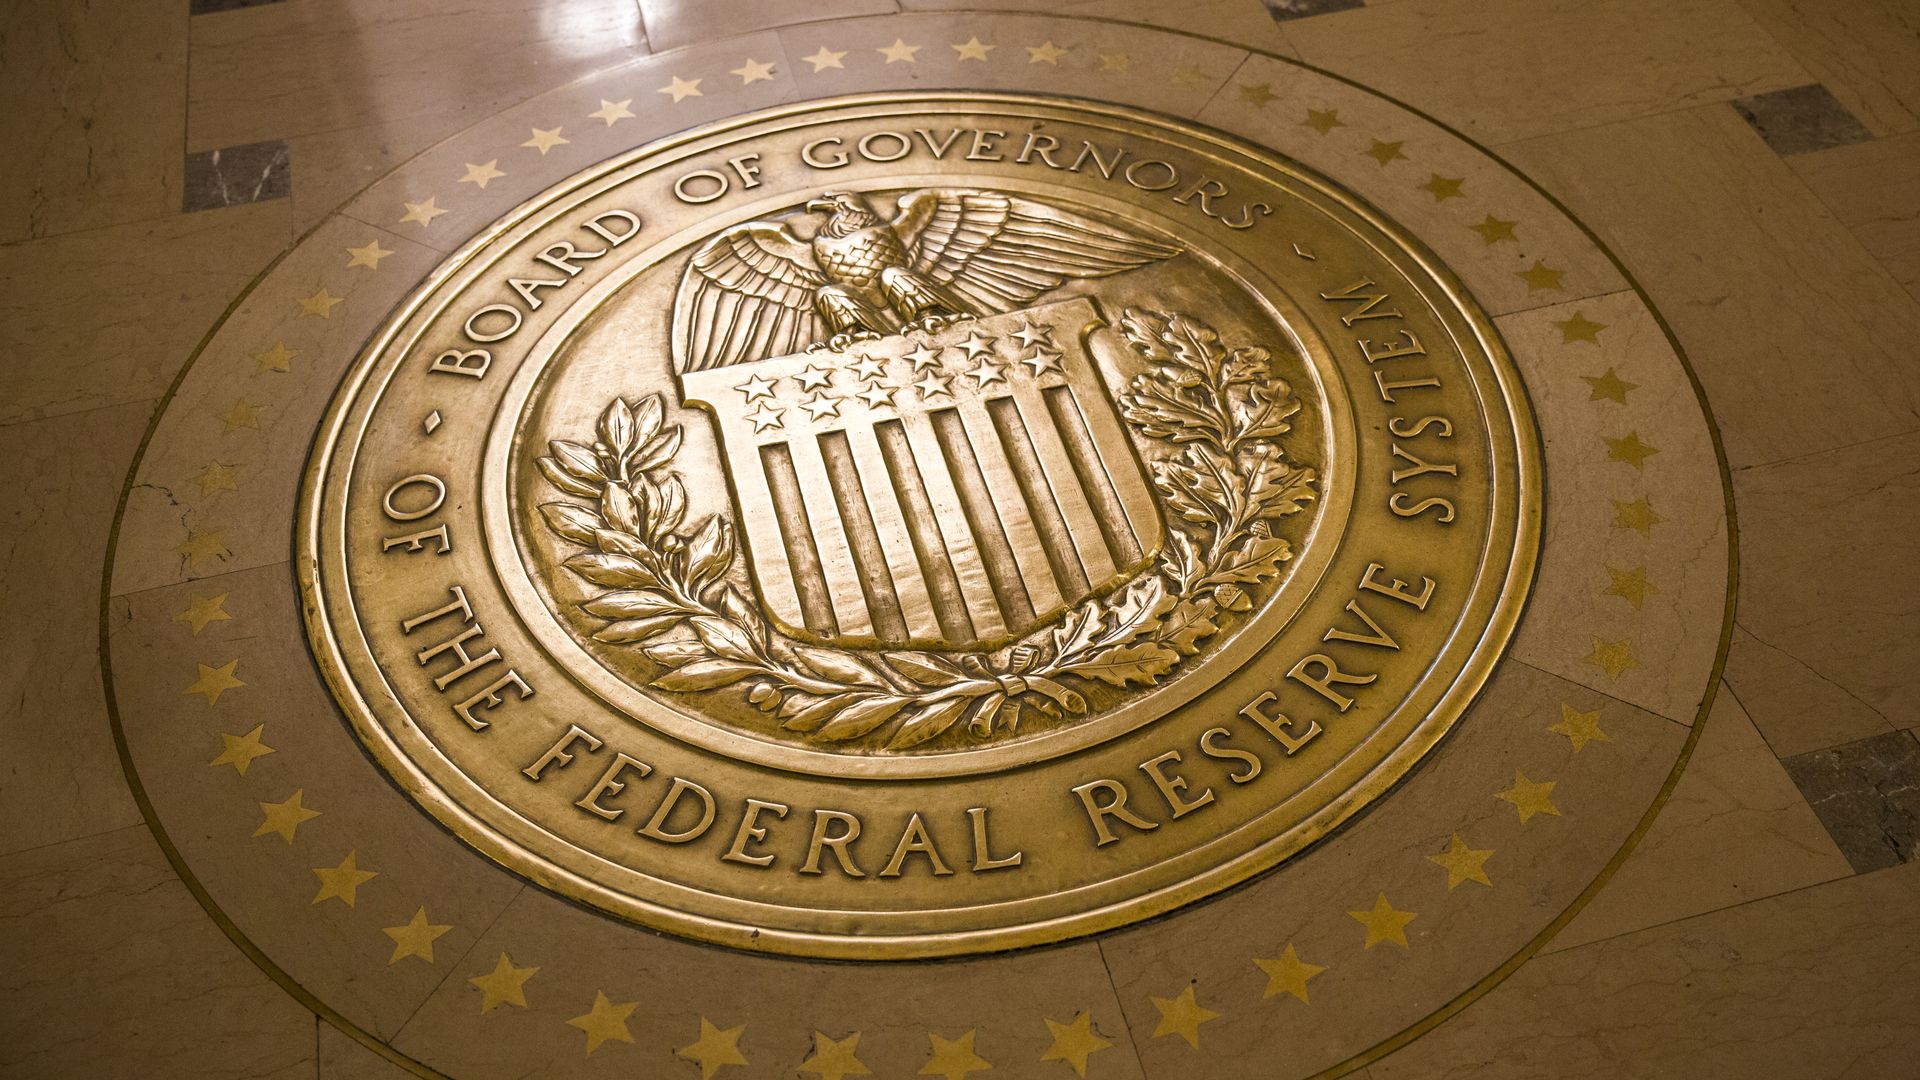 Gold-plated seal of the United States Federal Reserve.